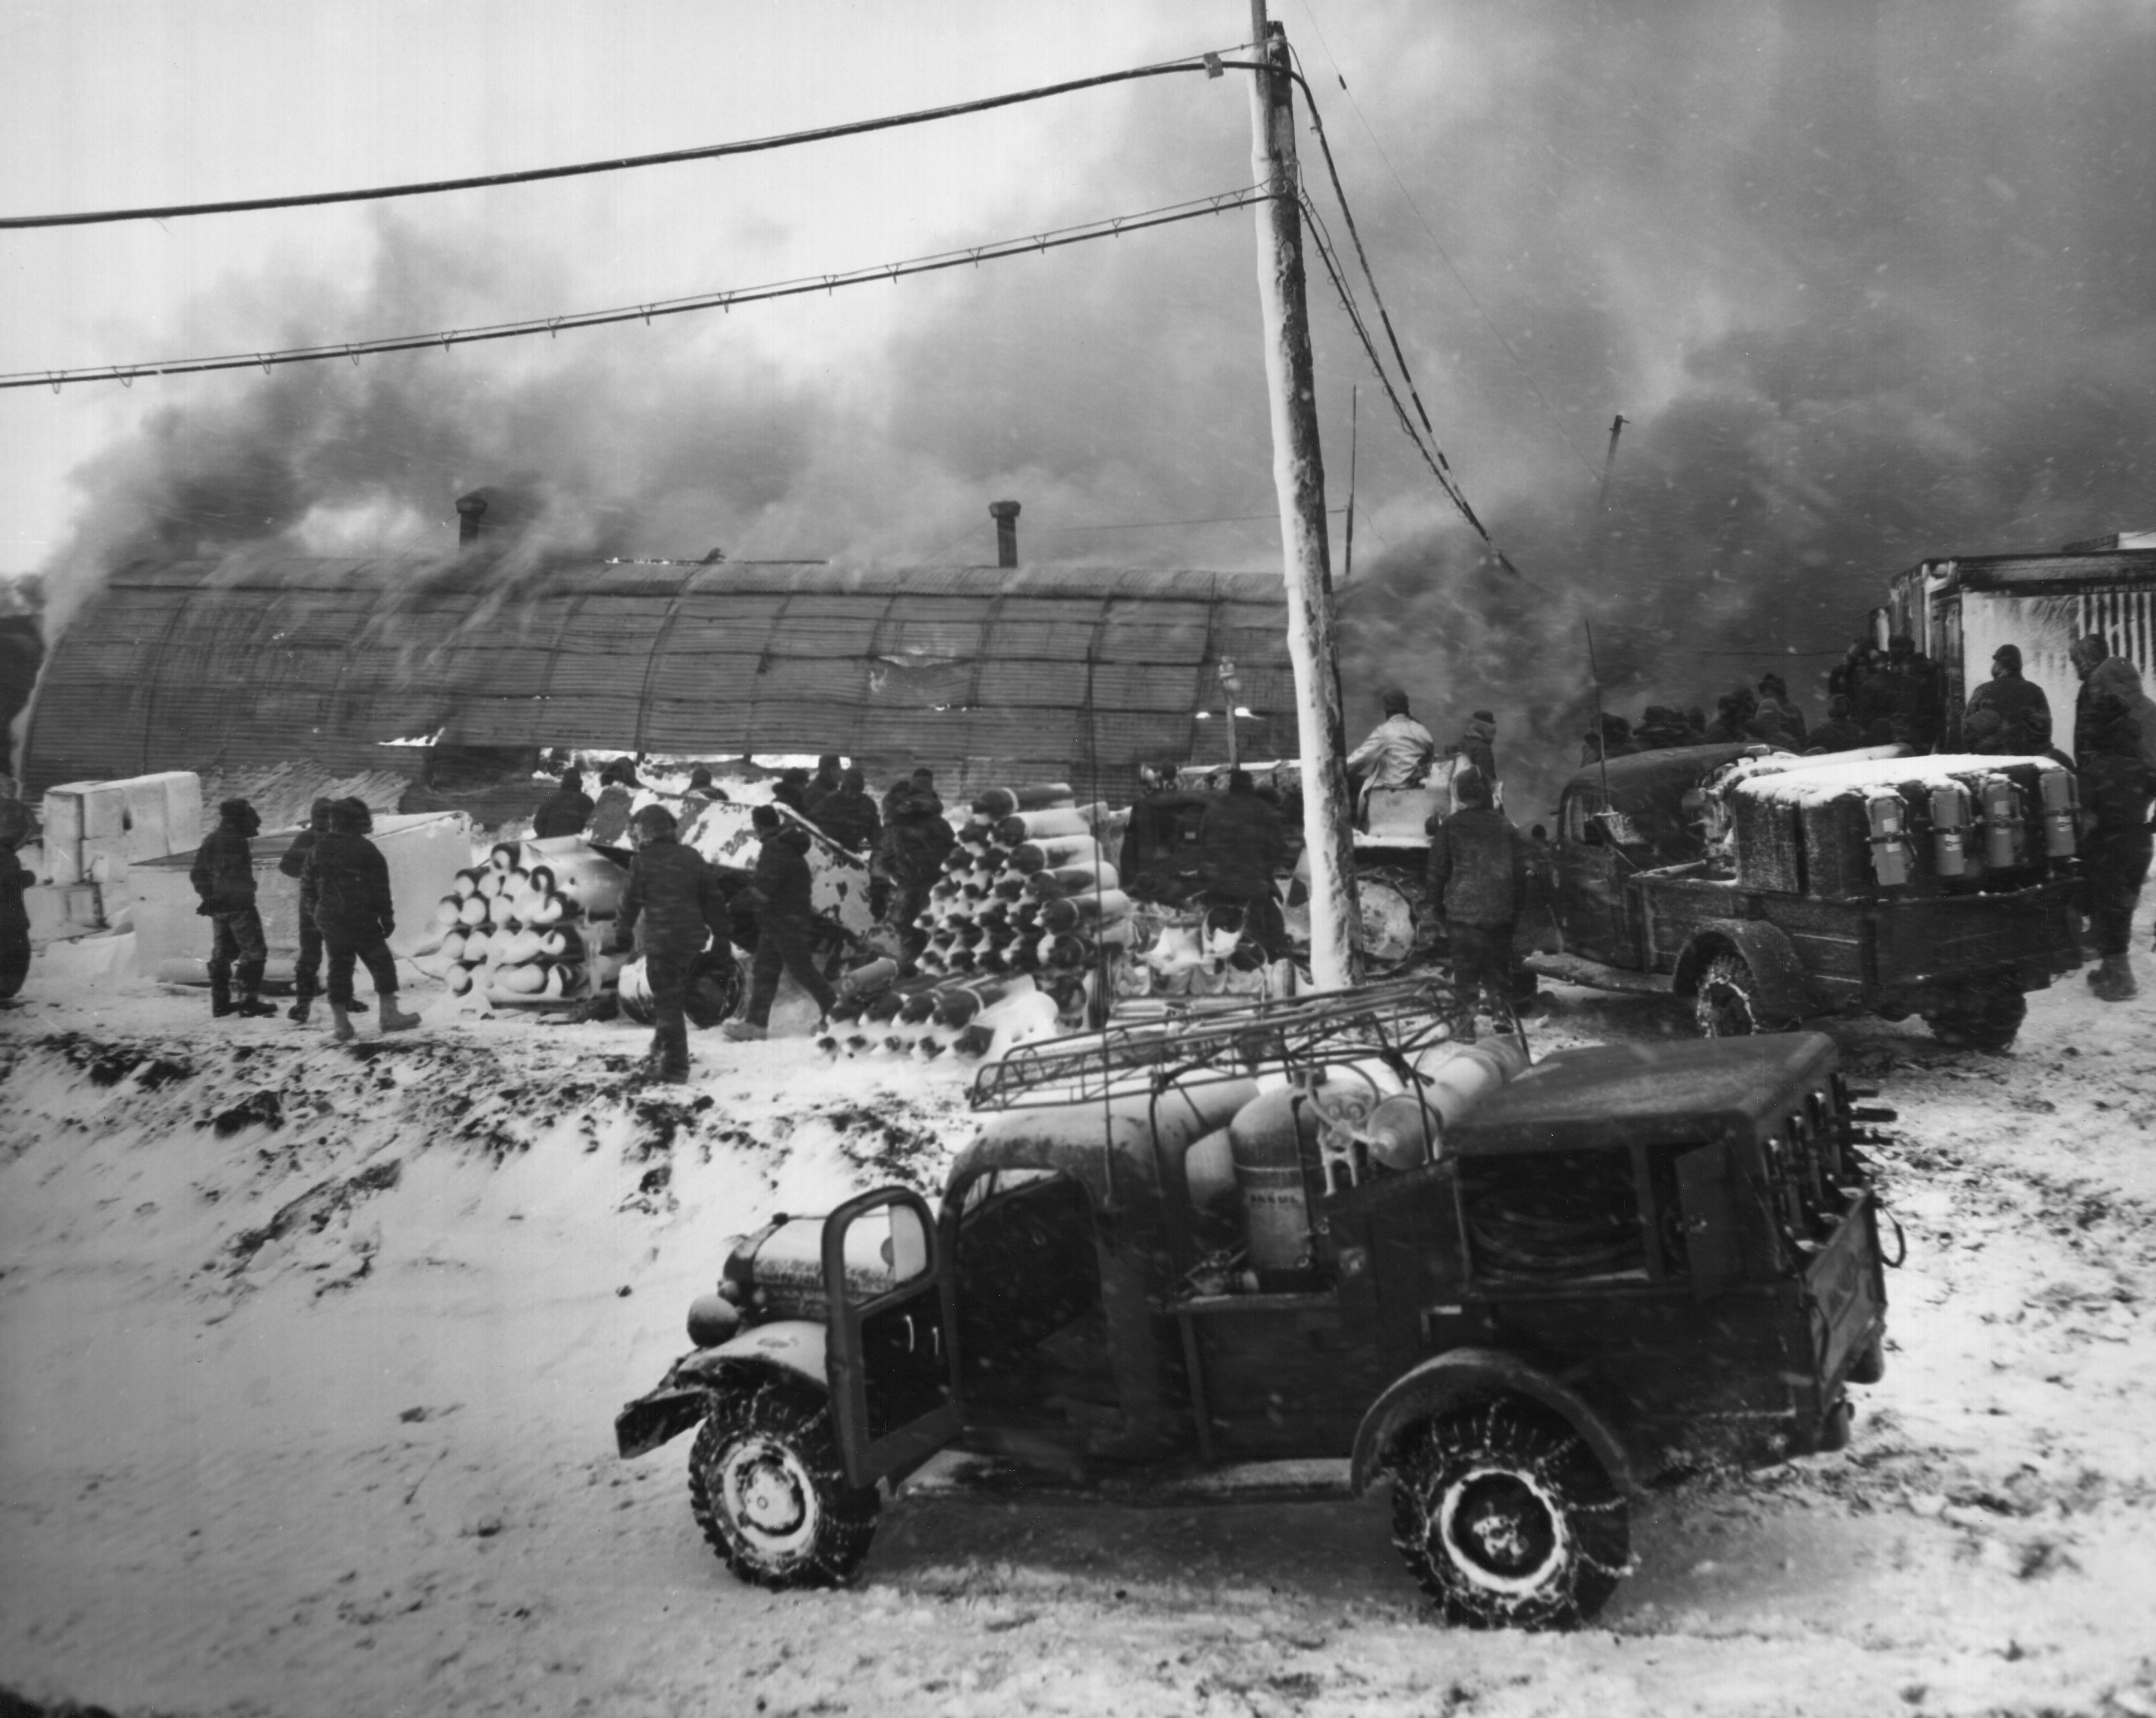 1961 photo of burning buildings.
